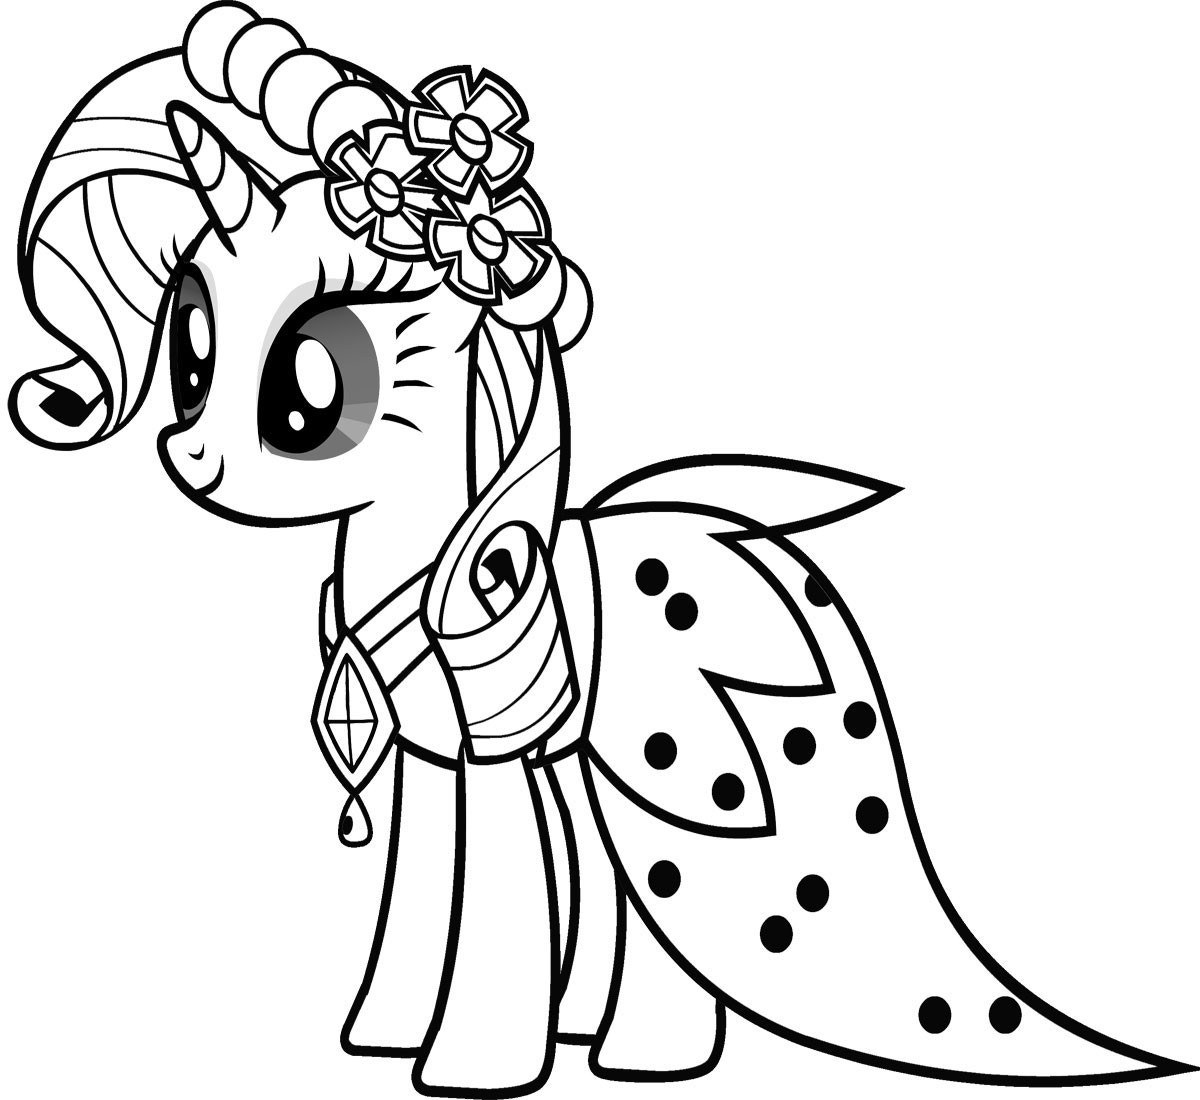 Coloring Pages Online
 Free Printable My Little Pony Coloring Pages For Kids